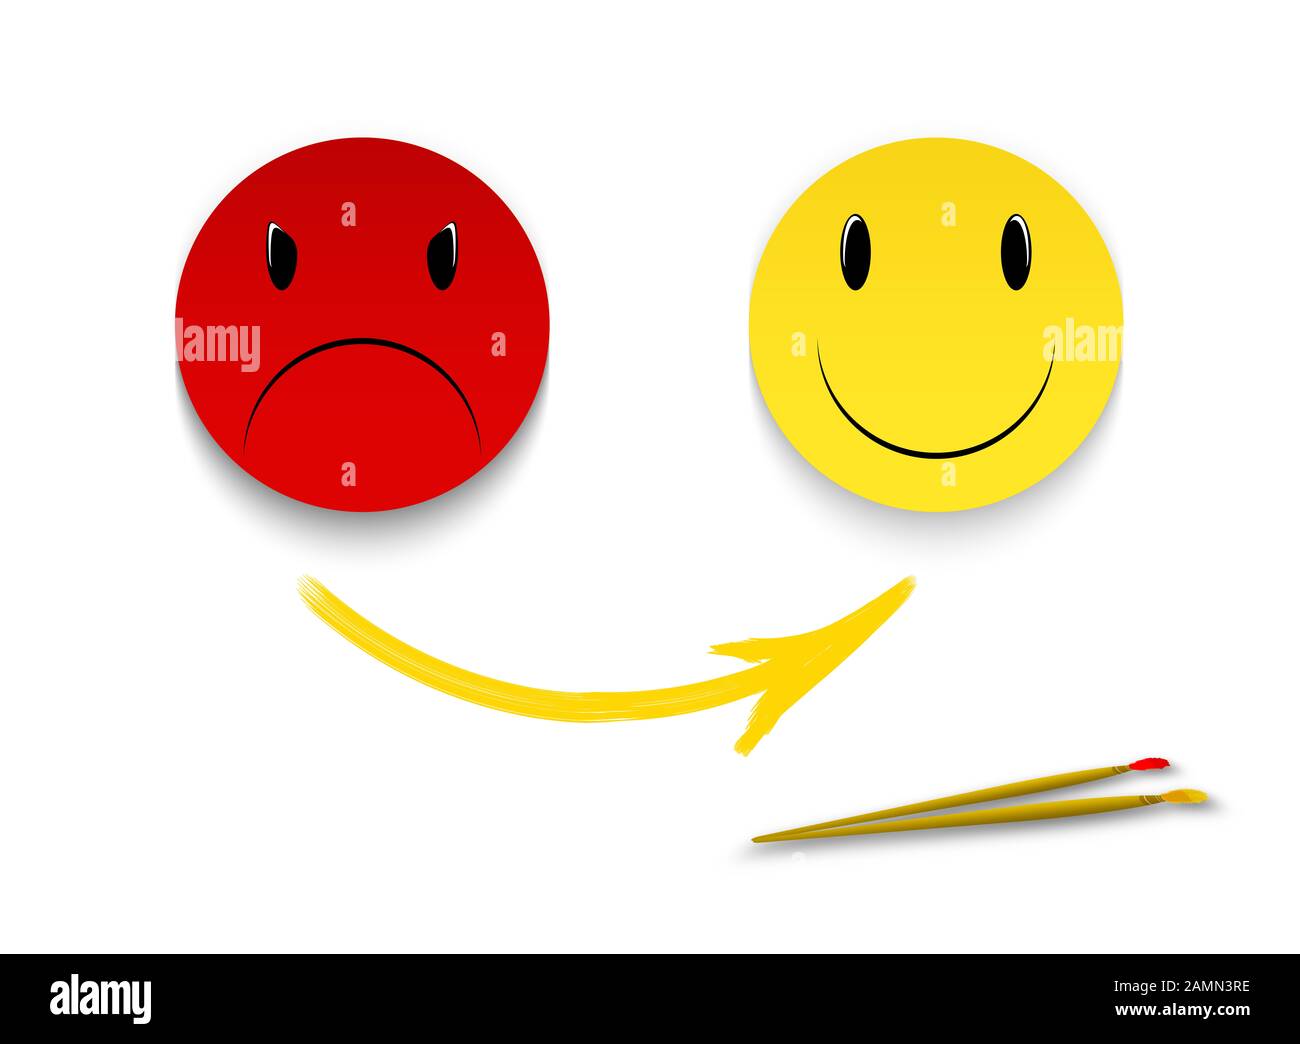 Angry emoticon, smiley face isolated on white background Stock Photo